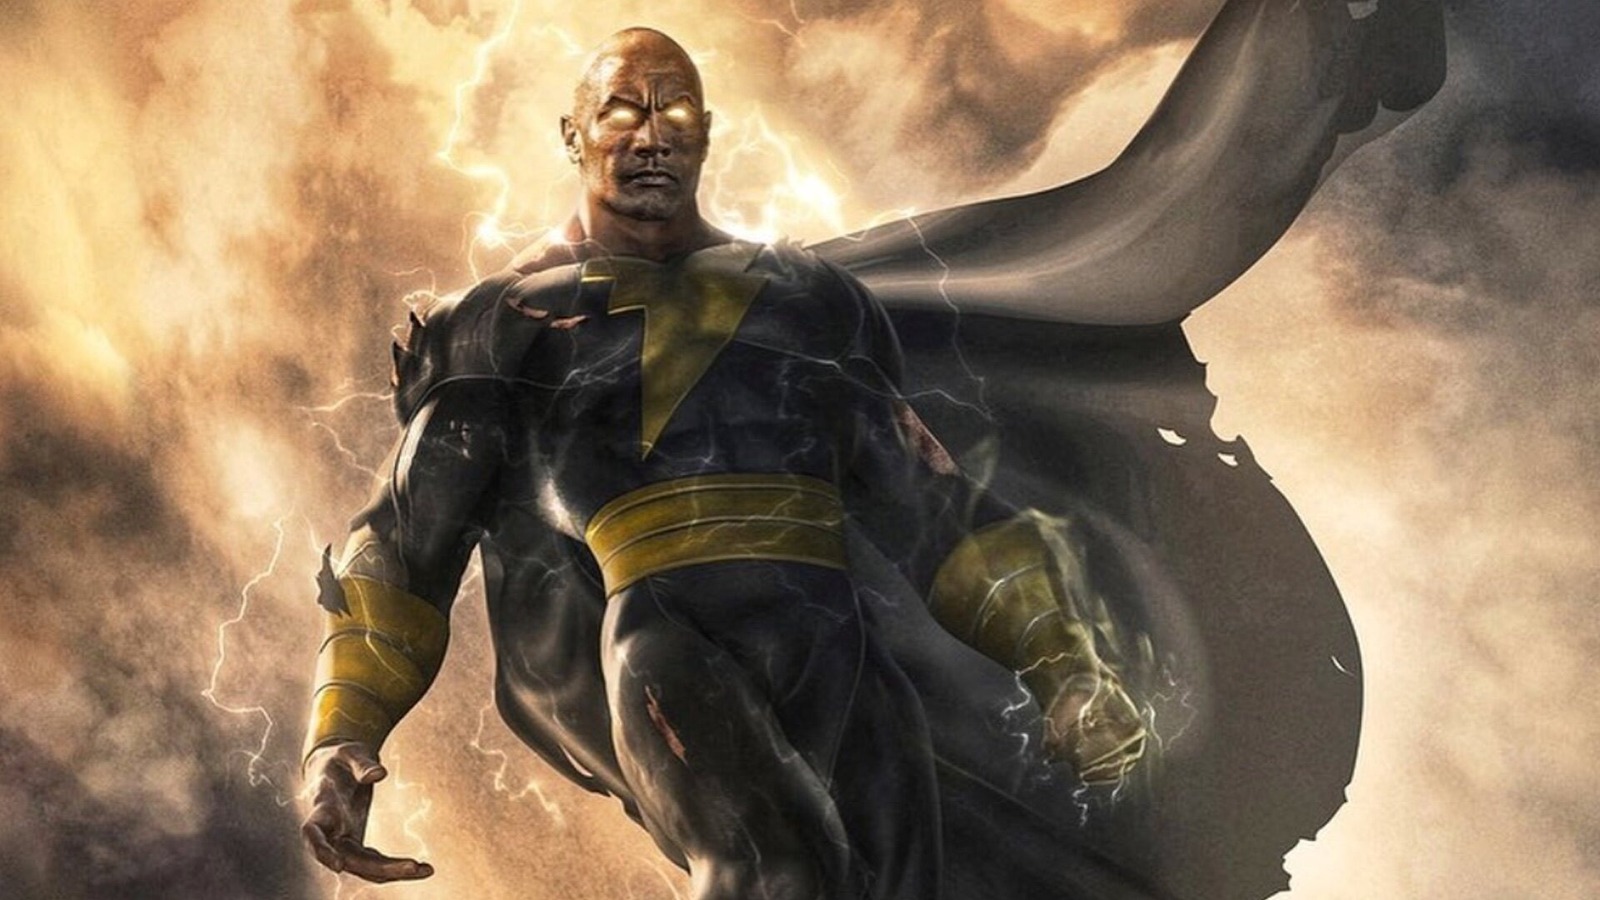 At the end of Black Adam (2022), the titular character sits on a